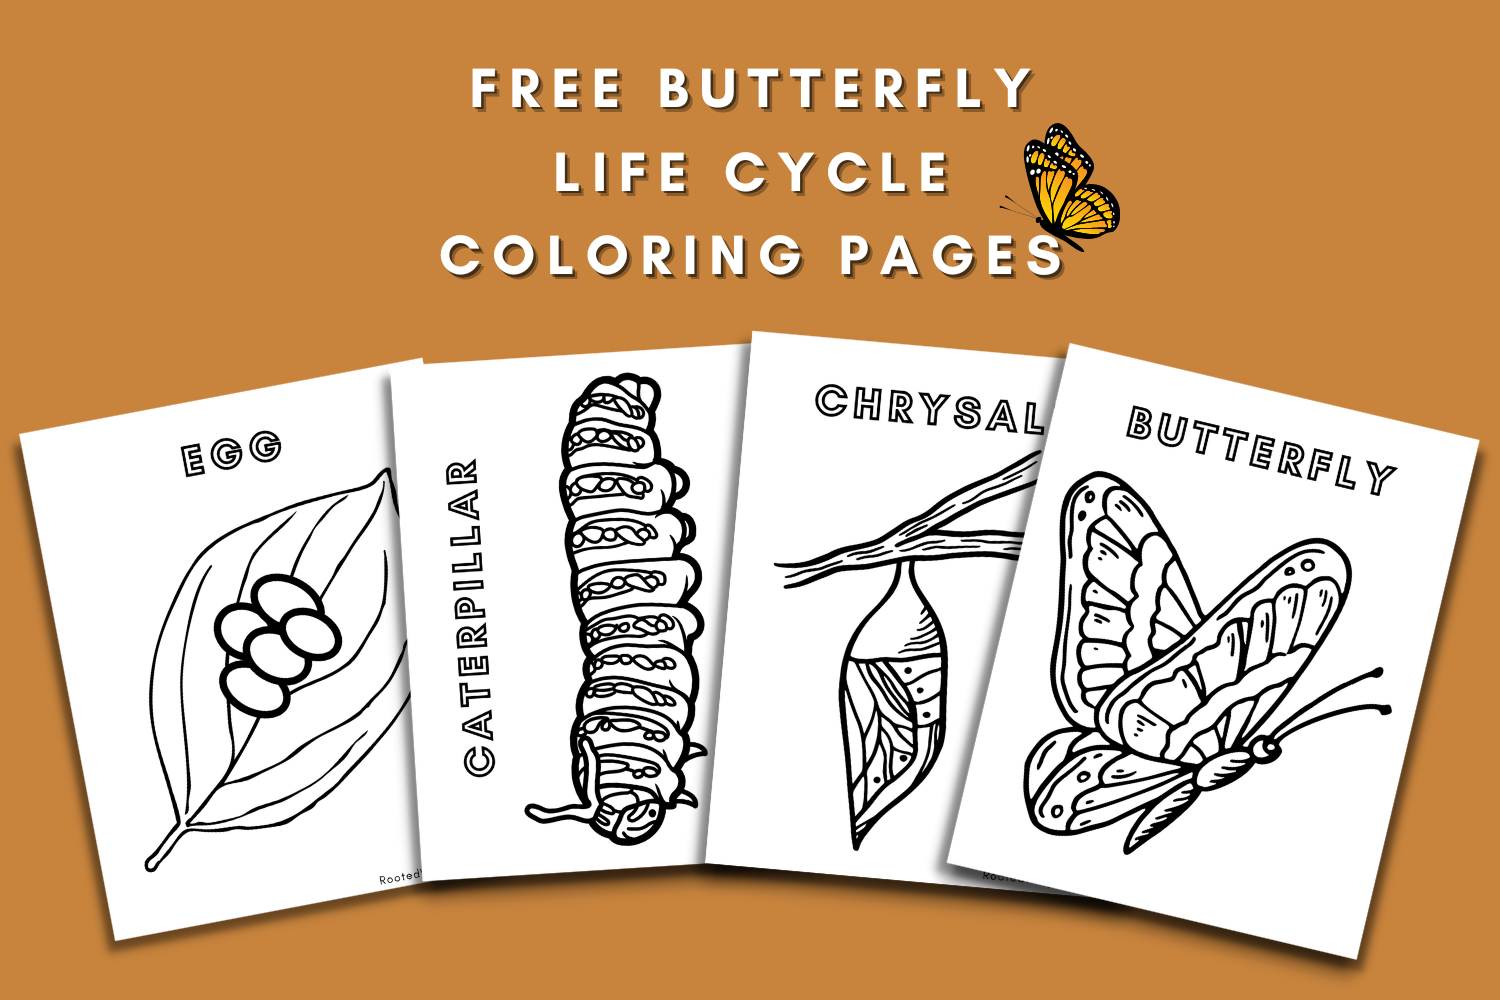 Free Butterfly Life Cycle Coloring Pages